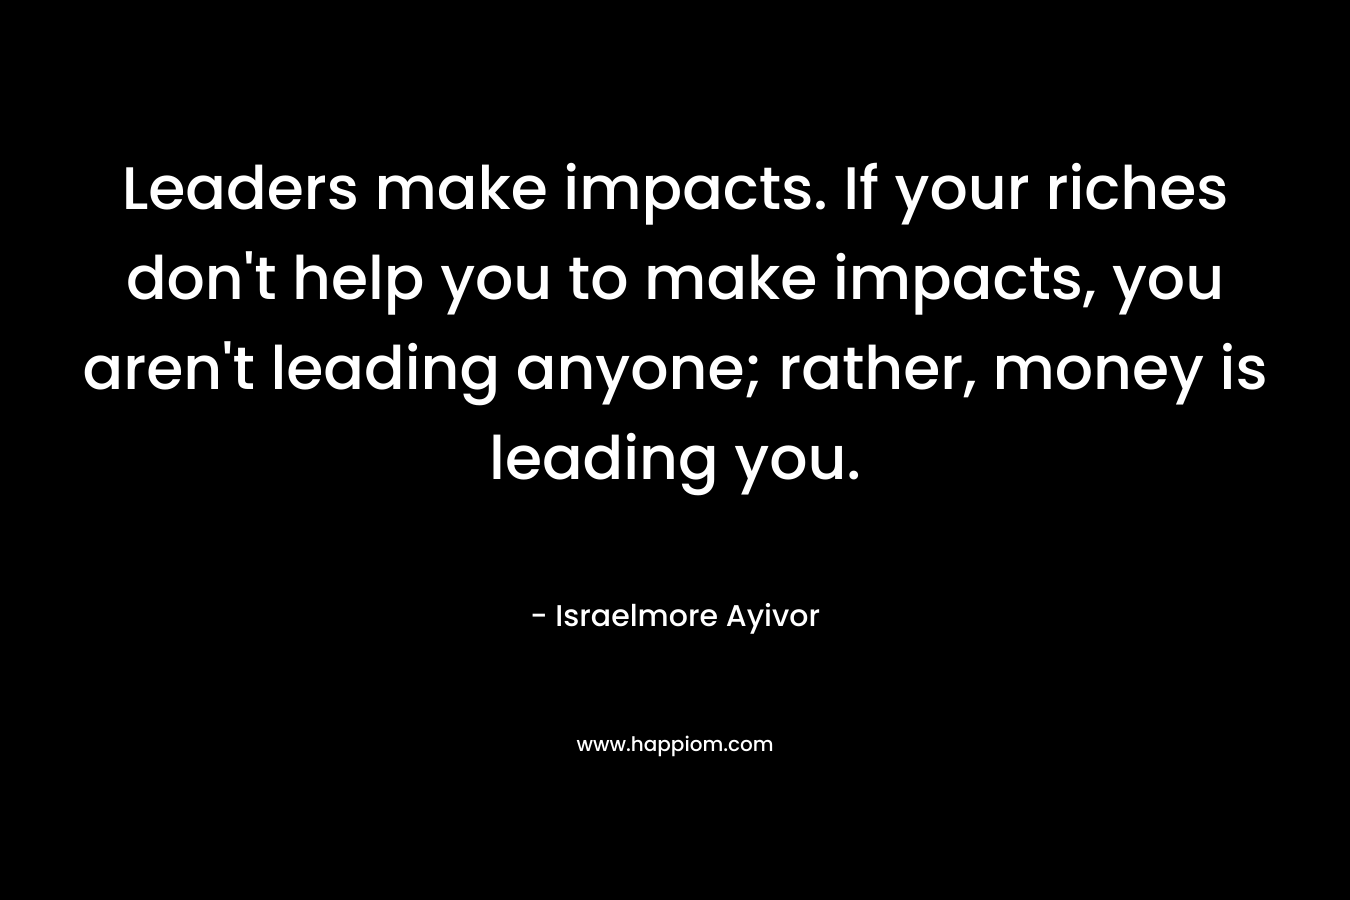 Leaders make impacts. If your riches don't help you to make impacts, you aren't leading anyone; rather, money is leading you.